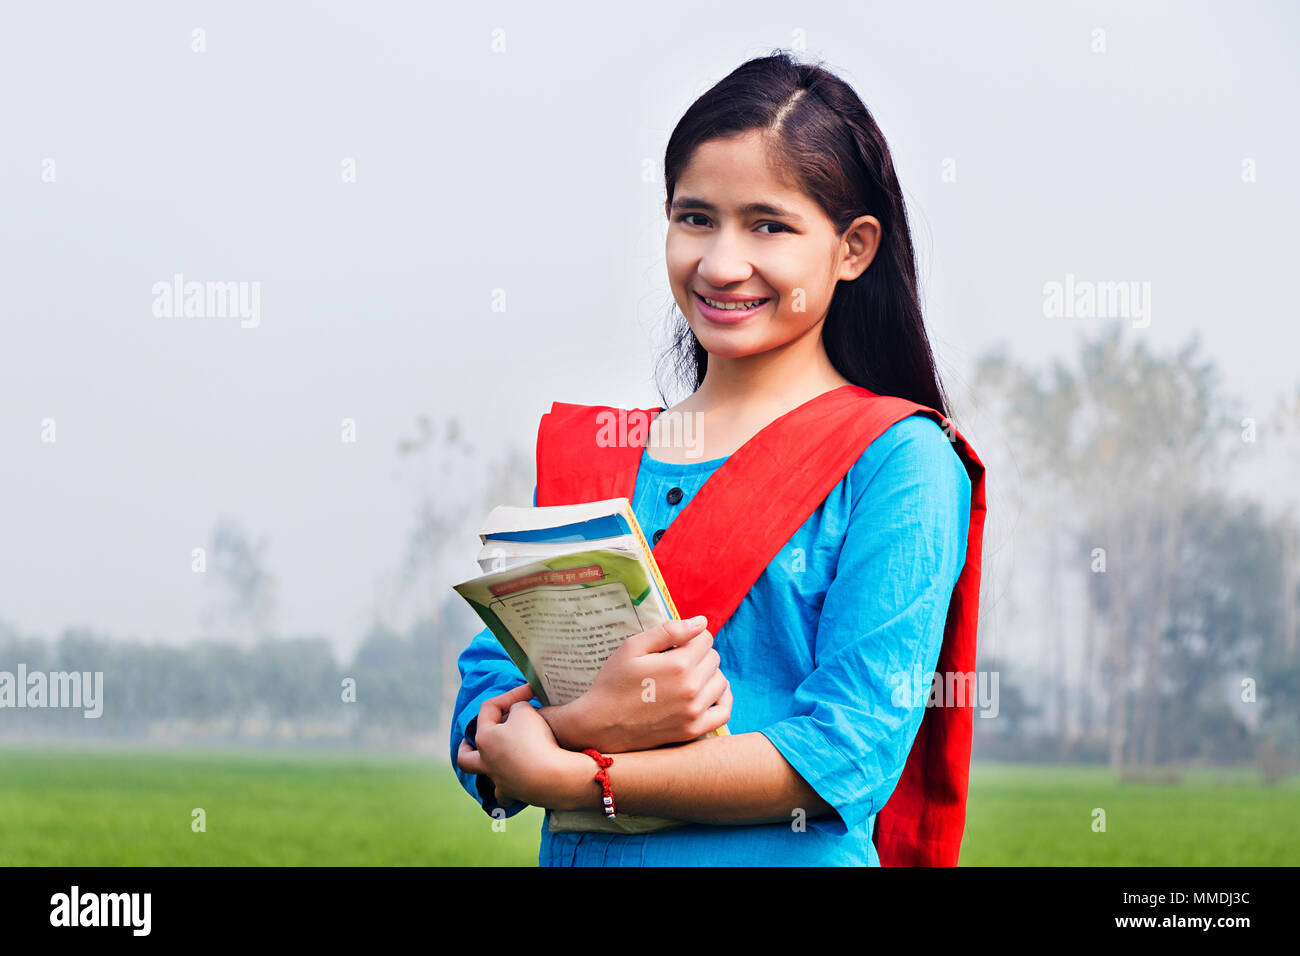 Rural Young Girl College Student Holding Books Education In-Farm Outdoors Stock Photo